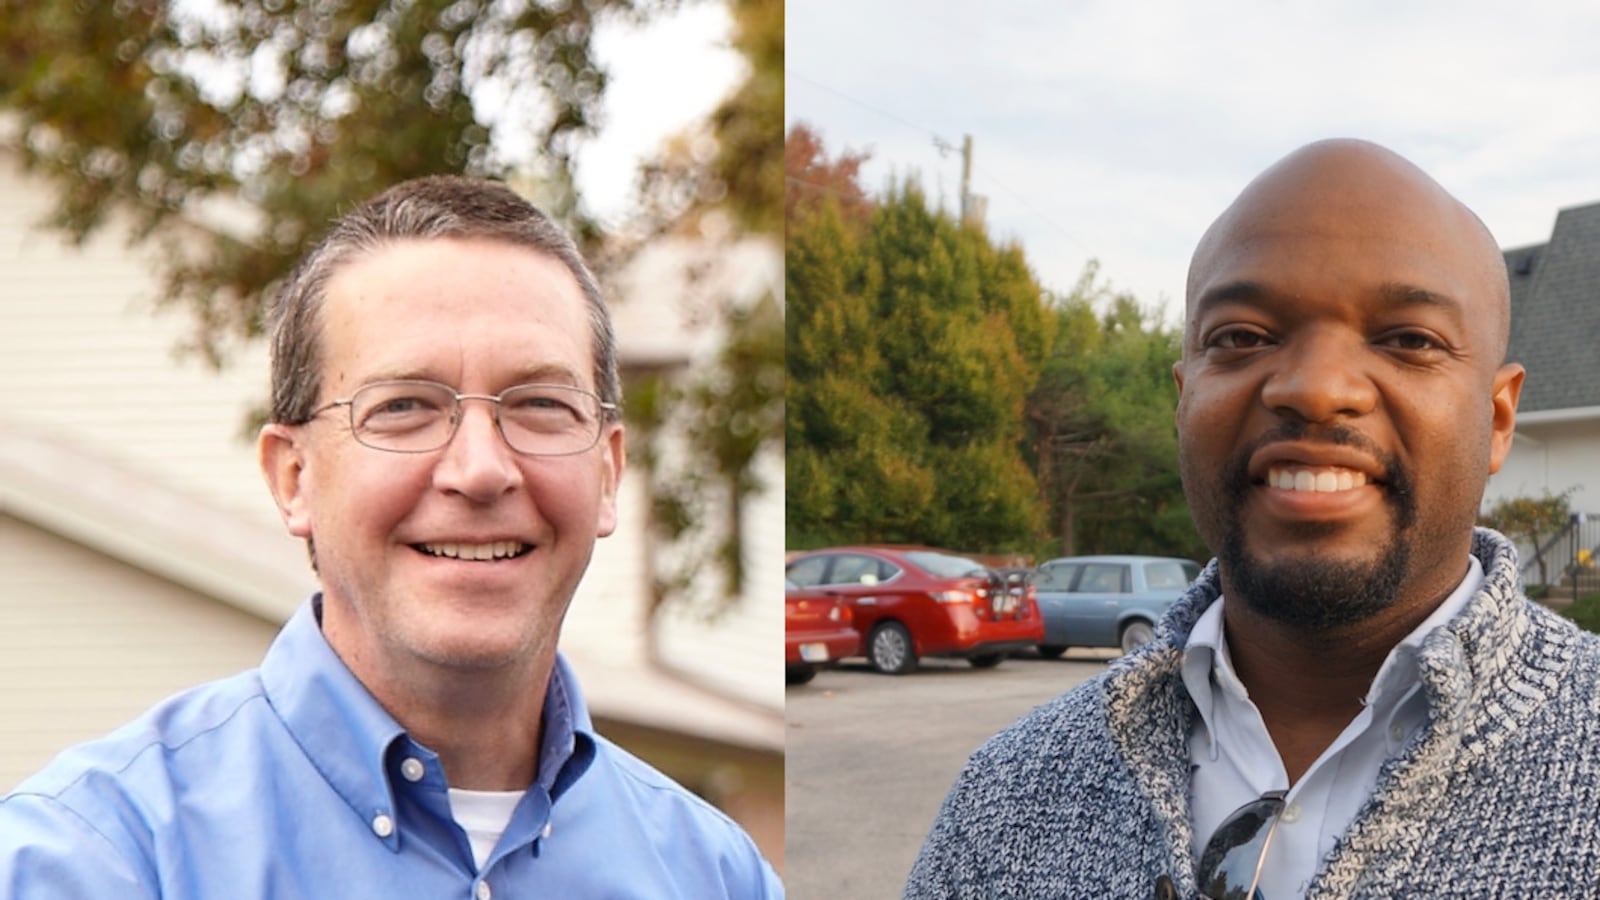 John Fencl (left) and Deitric Hall (right) are running for Washington Township School Board.